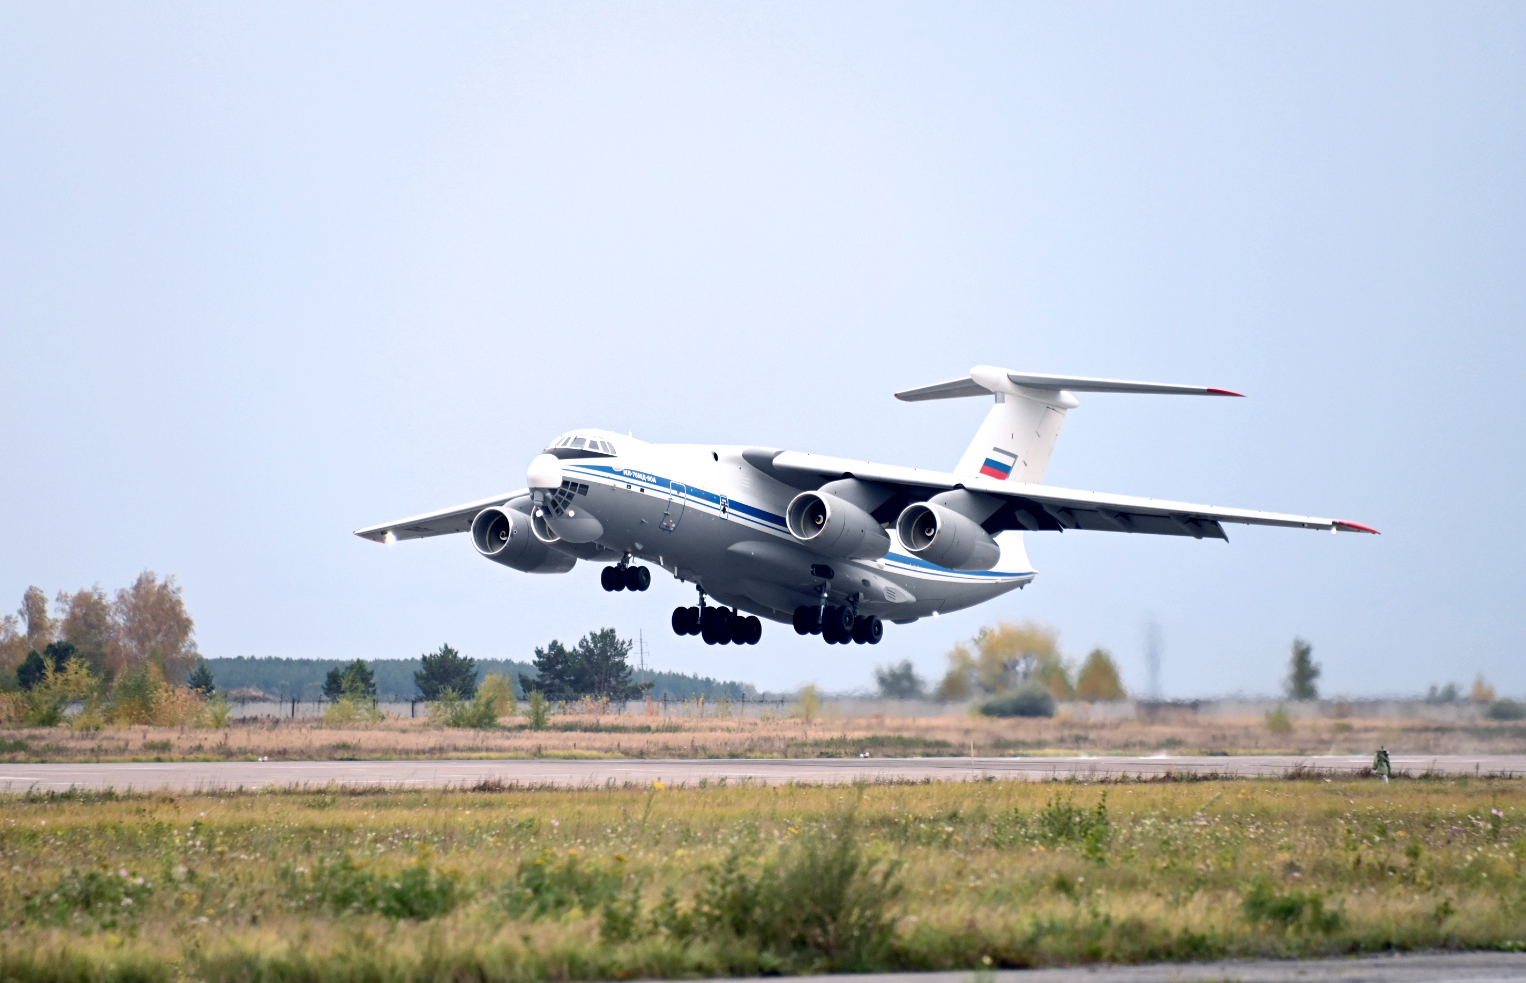 UAC Supplied Il-76MD-90A and Il-76MD-M Transport Aircraft to the Ministry of Defence